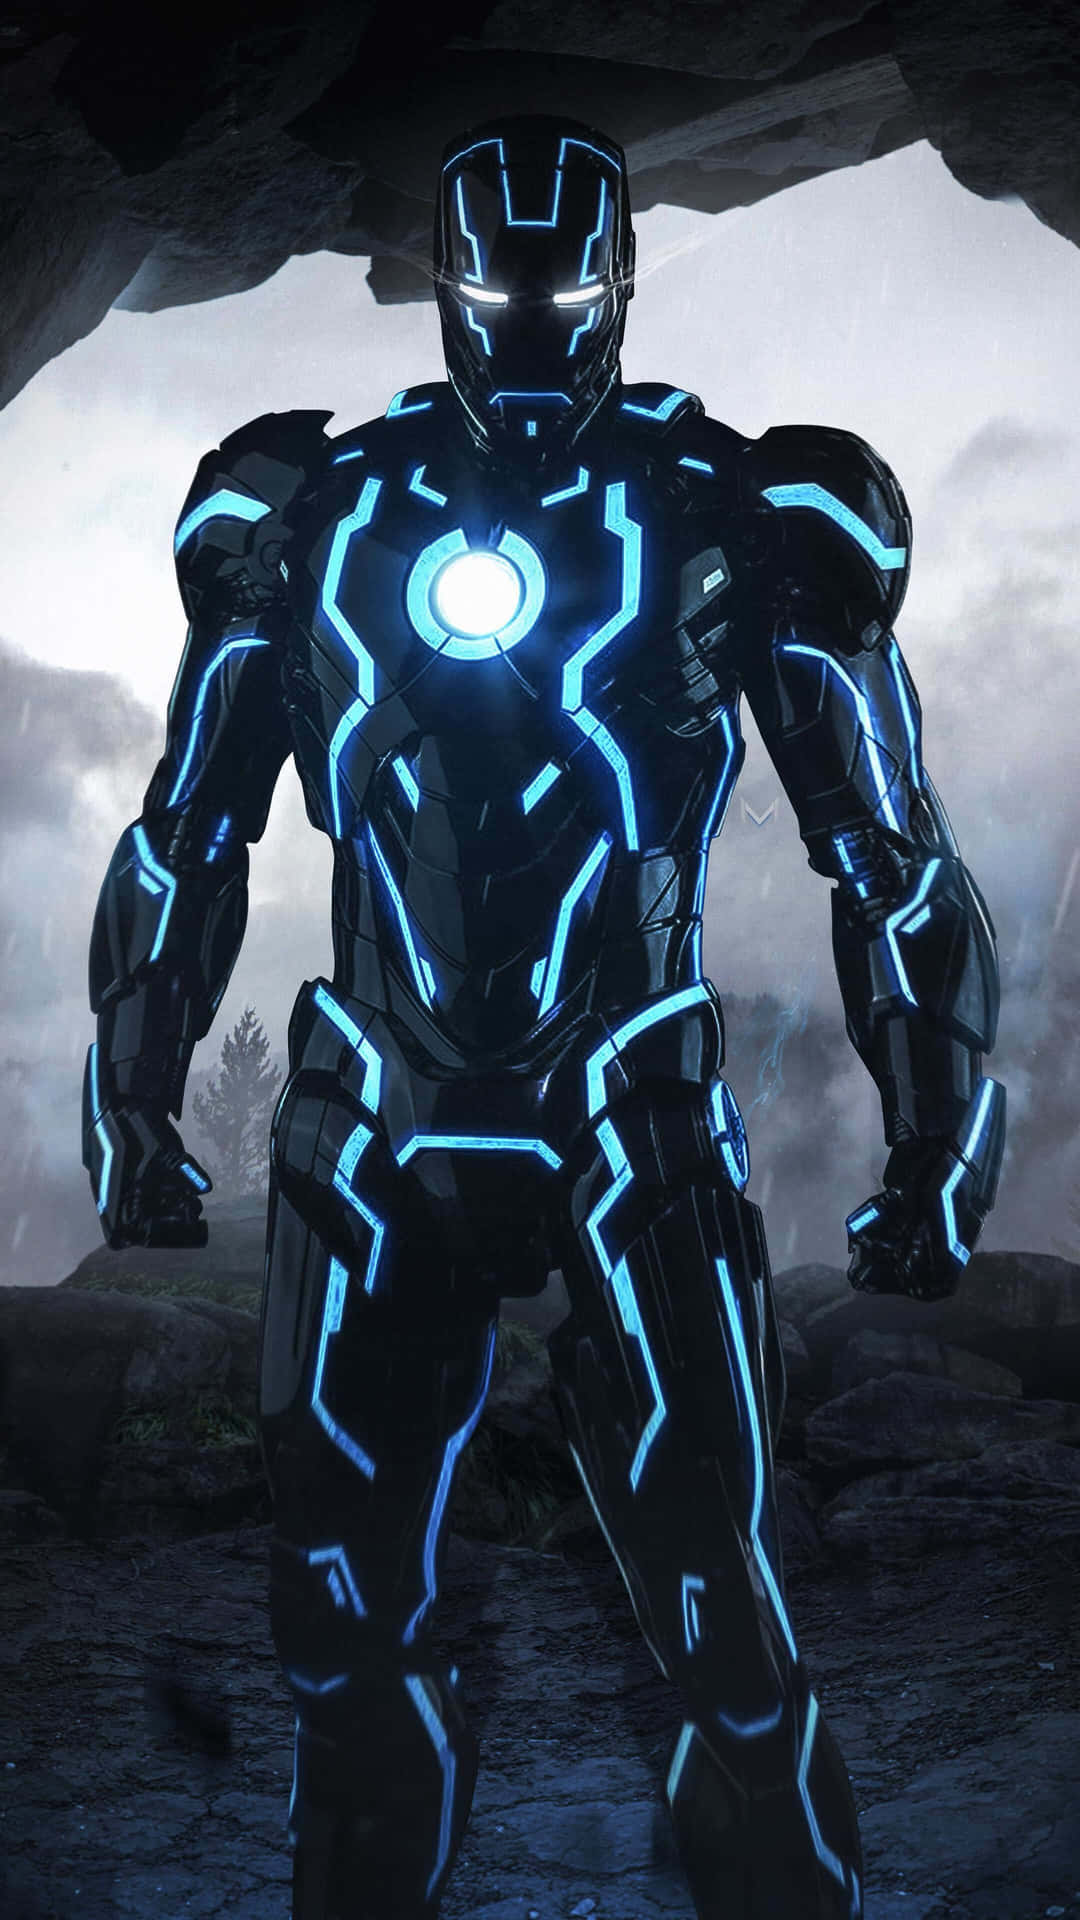 "Become a Superhero Today with the Official Iron Man Suit" Wallpaper